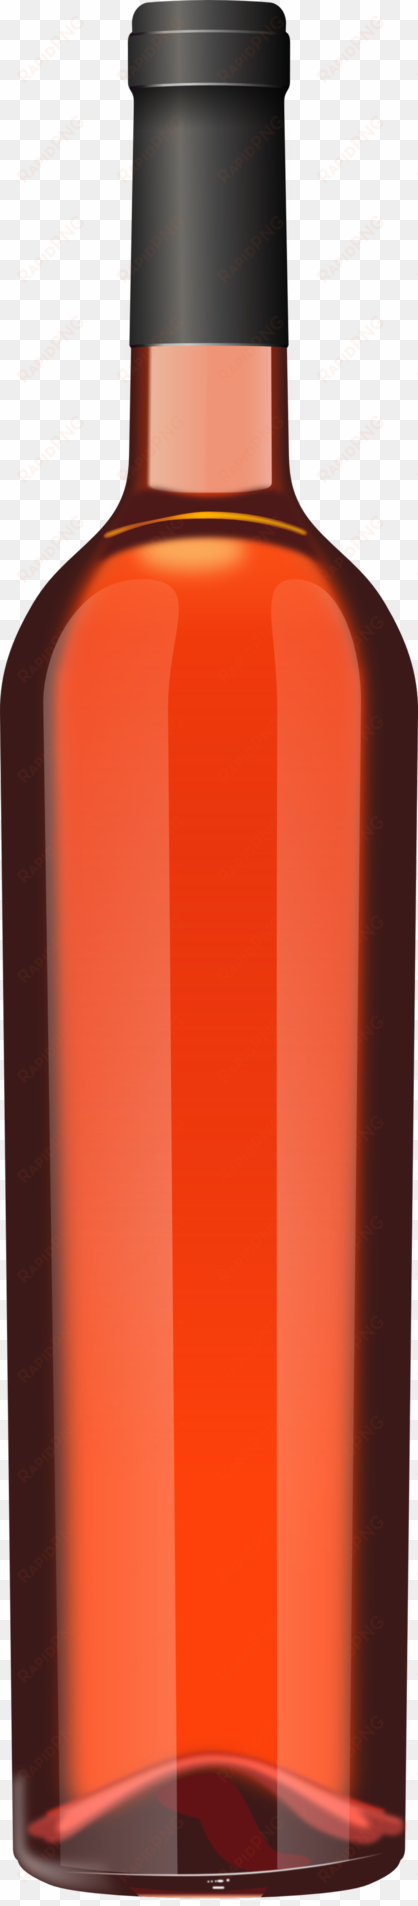 png images free download glass image - wine bottle png